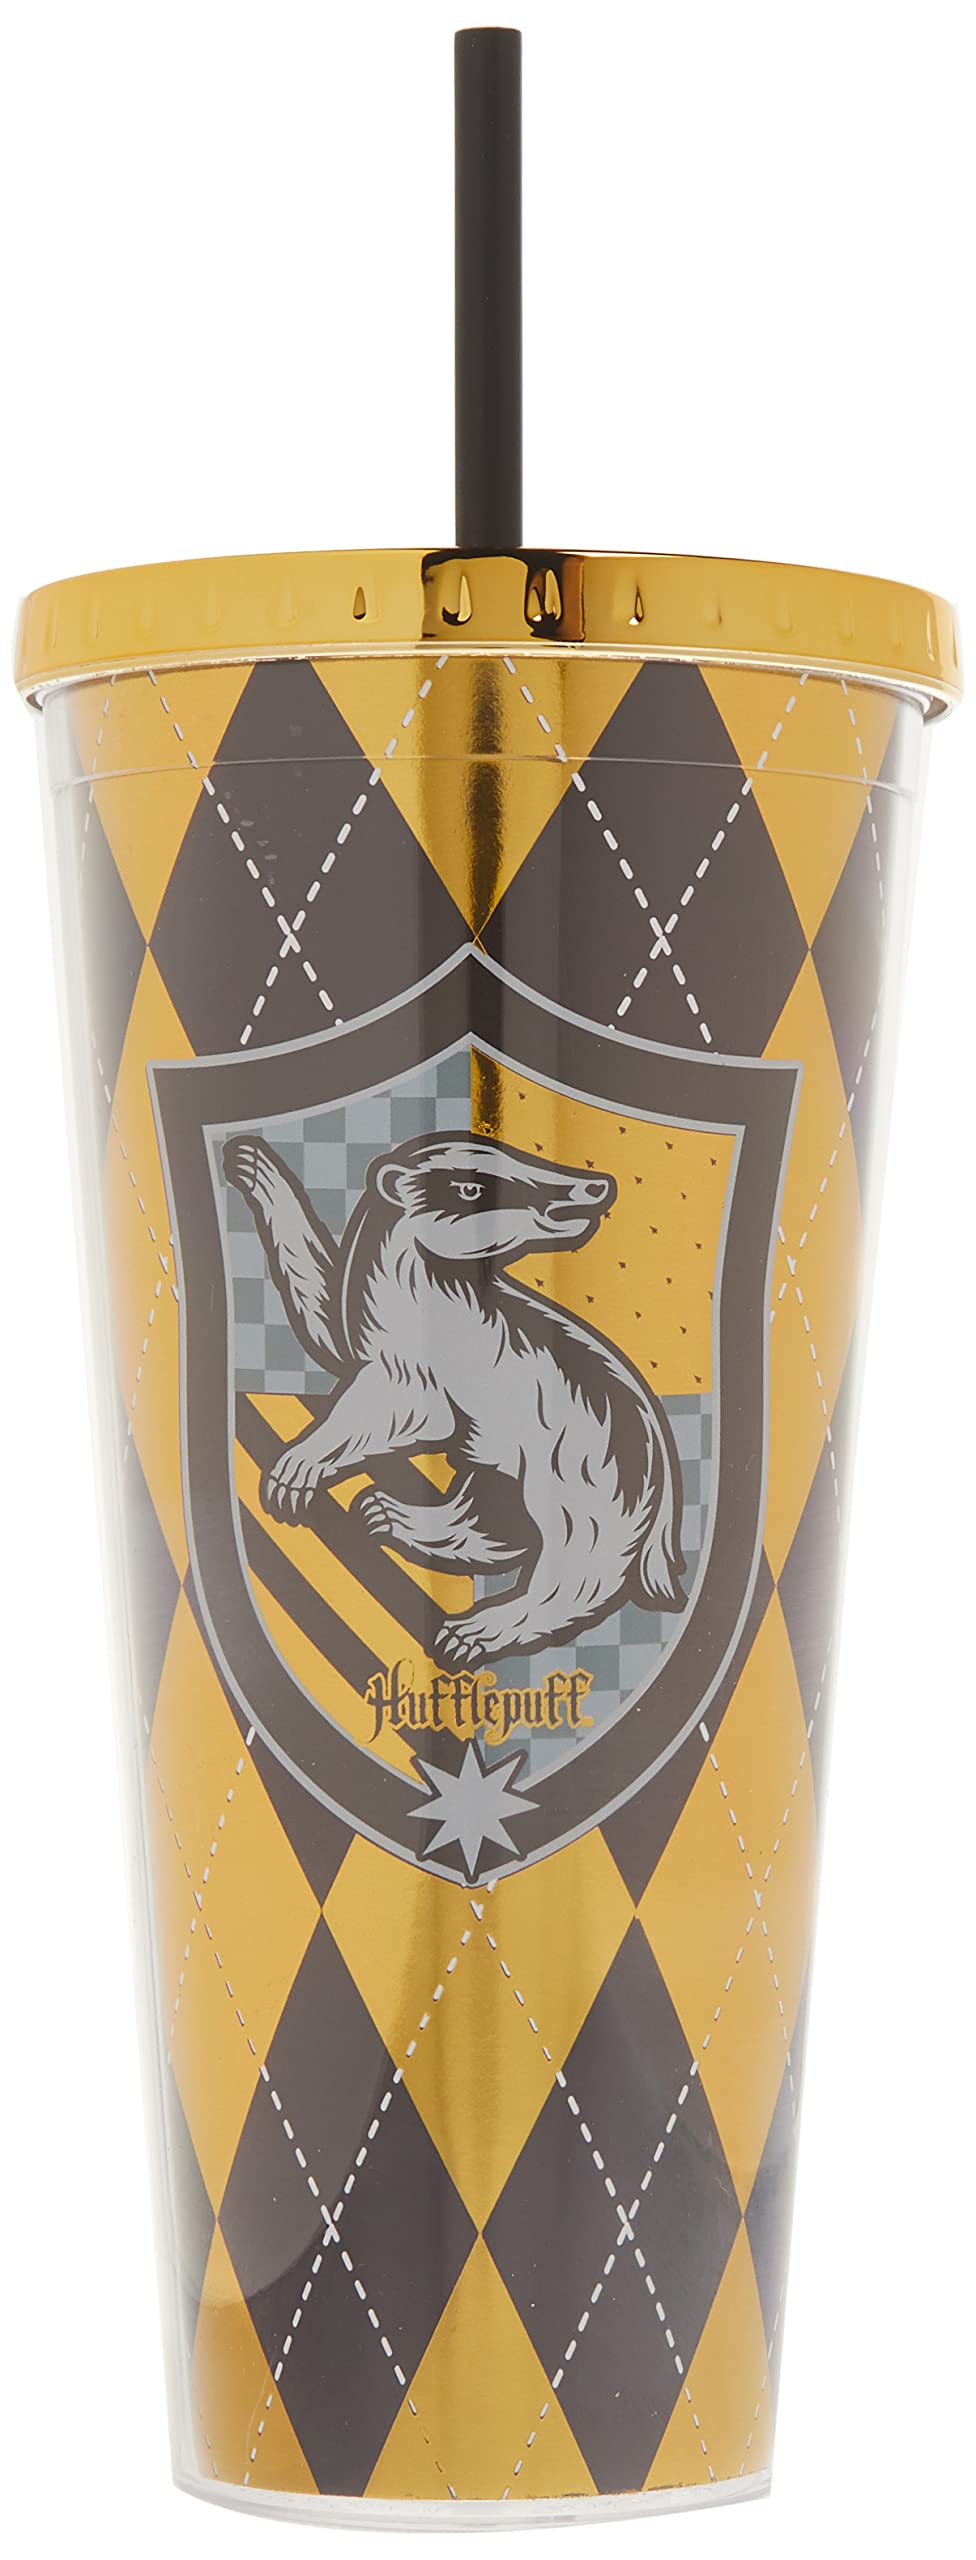 Spoontiques - Harry Potter Tumbler - Hufflepuff Foil Cup with Straw - 20 oz - Acrylic - Yellow